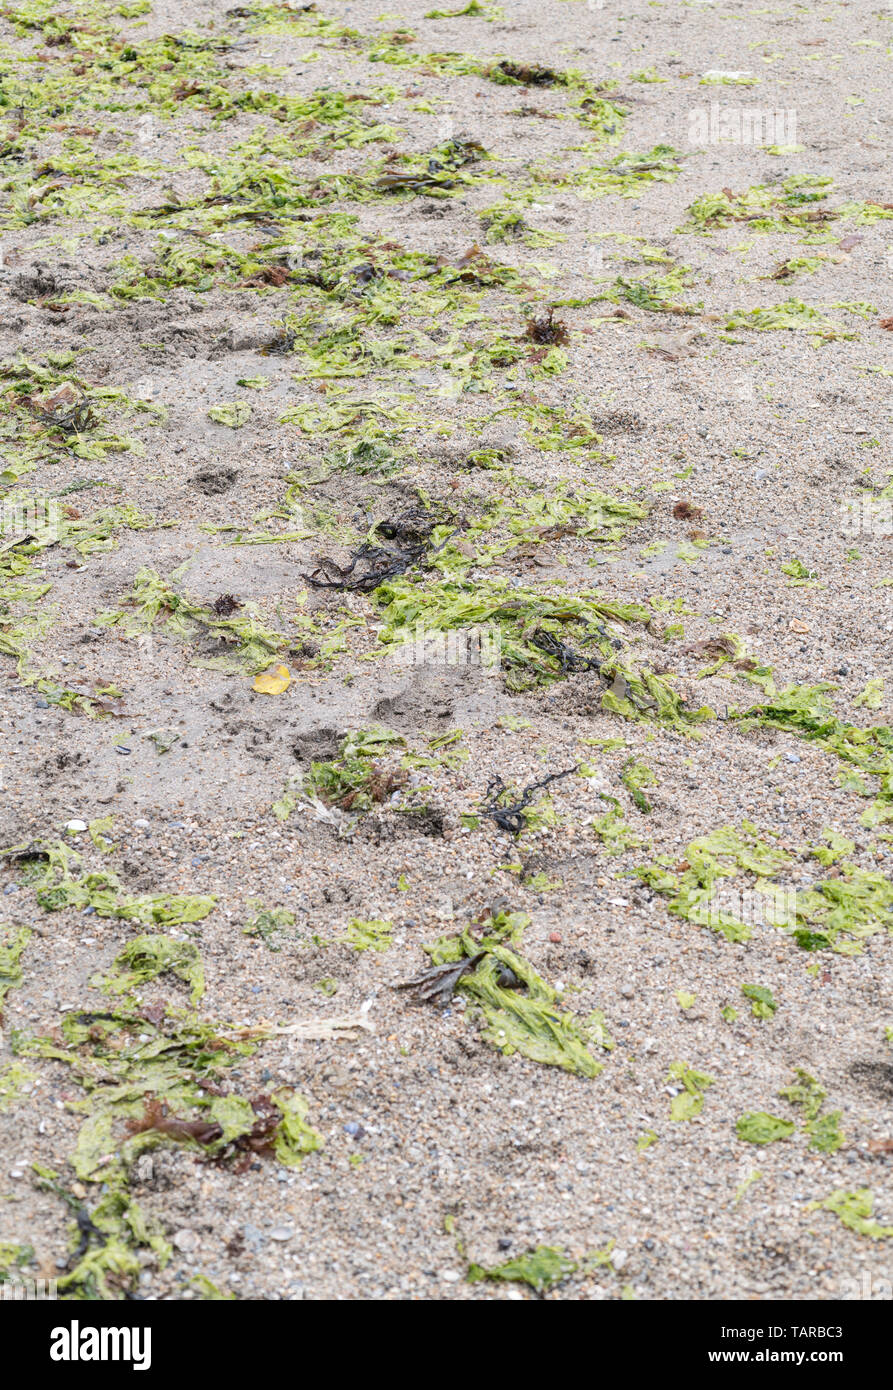 The green seaweed Sea Lettuce / Ulva lactuca washed ashore on a beach and deposited at the drift line or tideline. Fresh Sea Lettuce is edible. Stock Photo